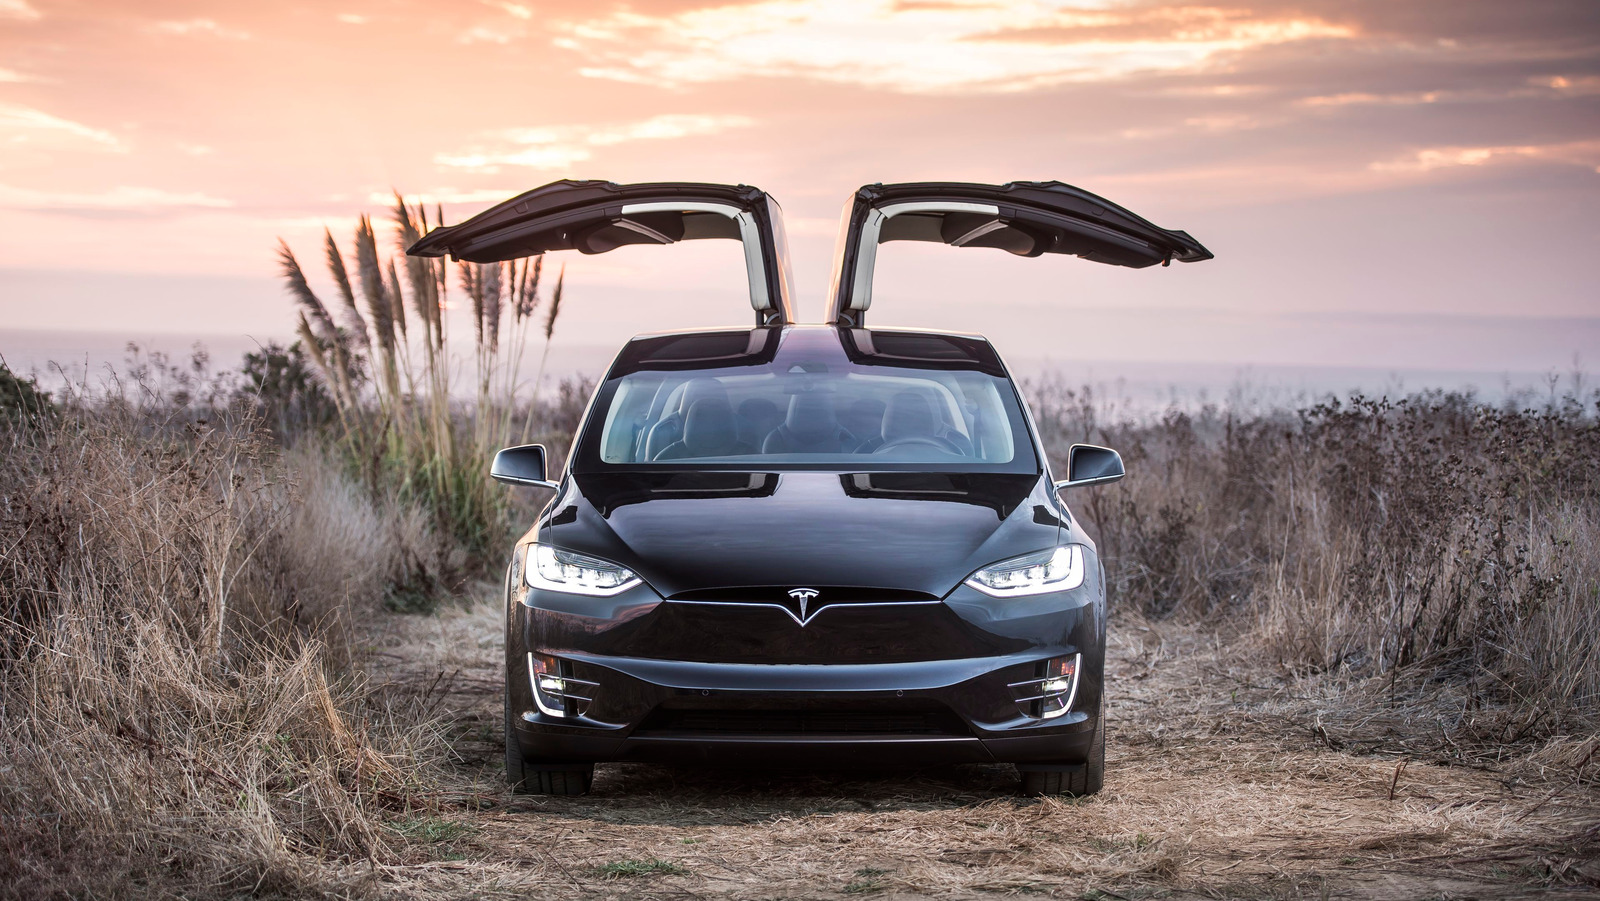 Tesla Issues Recall of 30,000 Model X Cars: Learn More About Airbag Safety & What it Means if You Need to File a Lawsuit Against Tesla